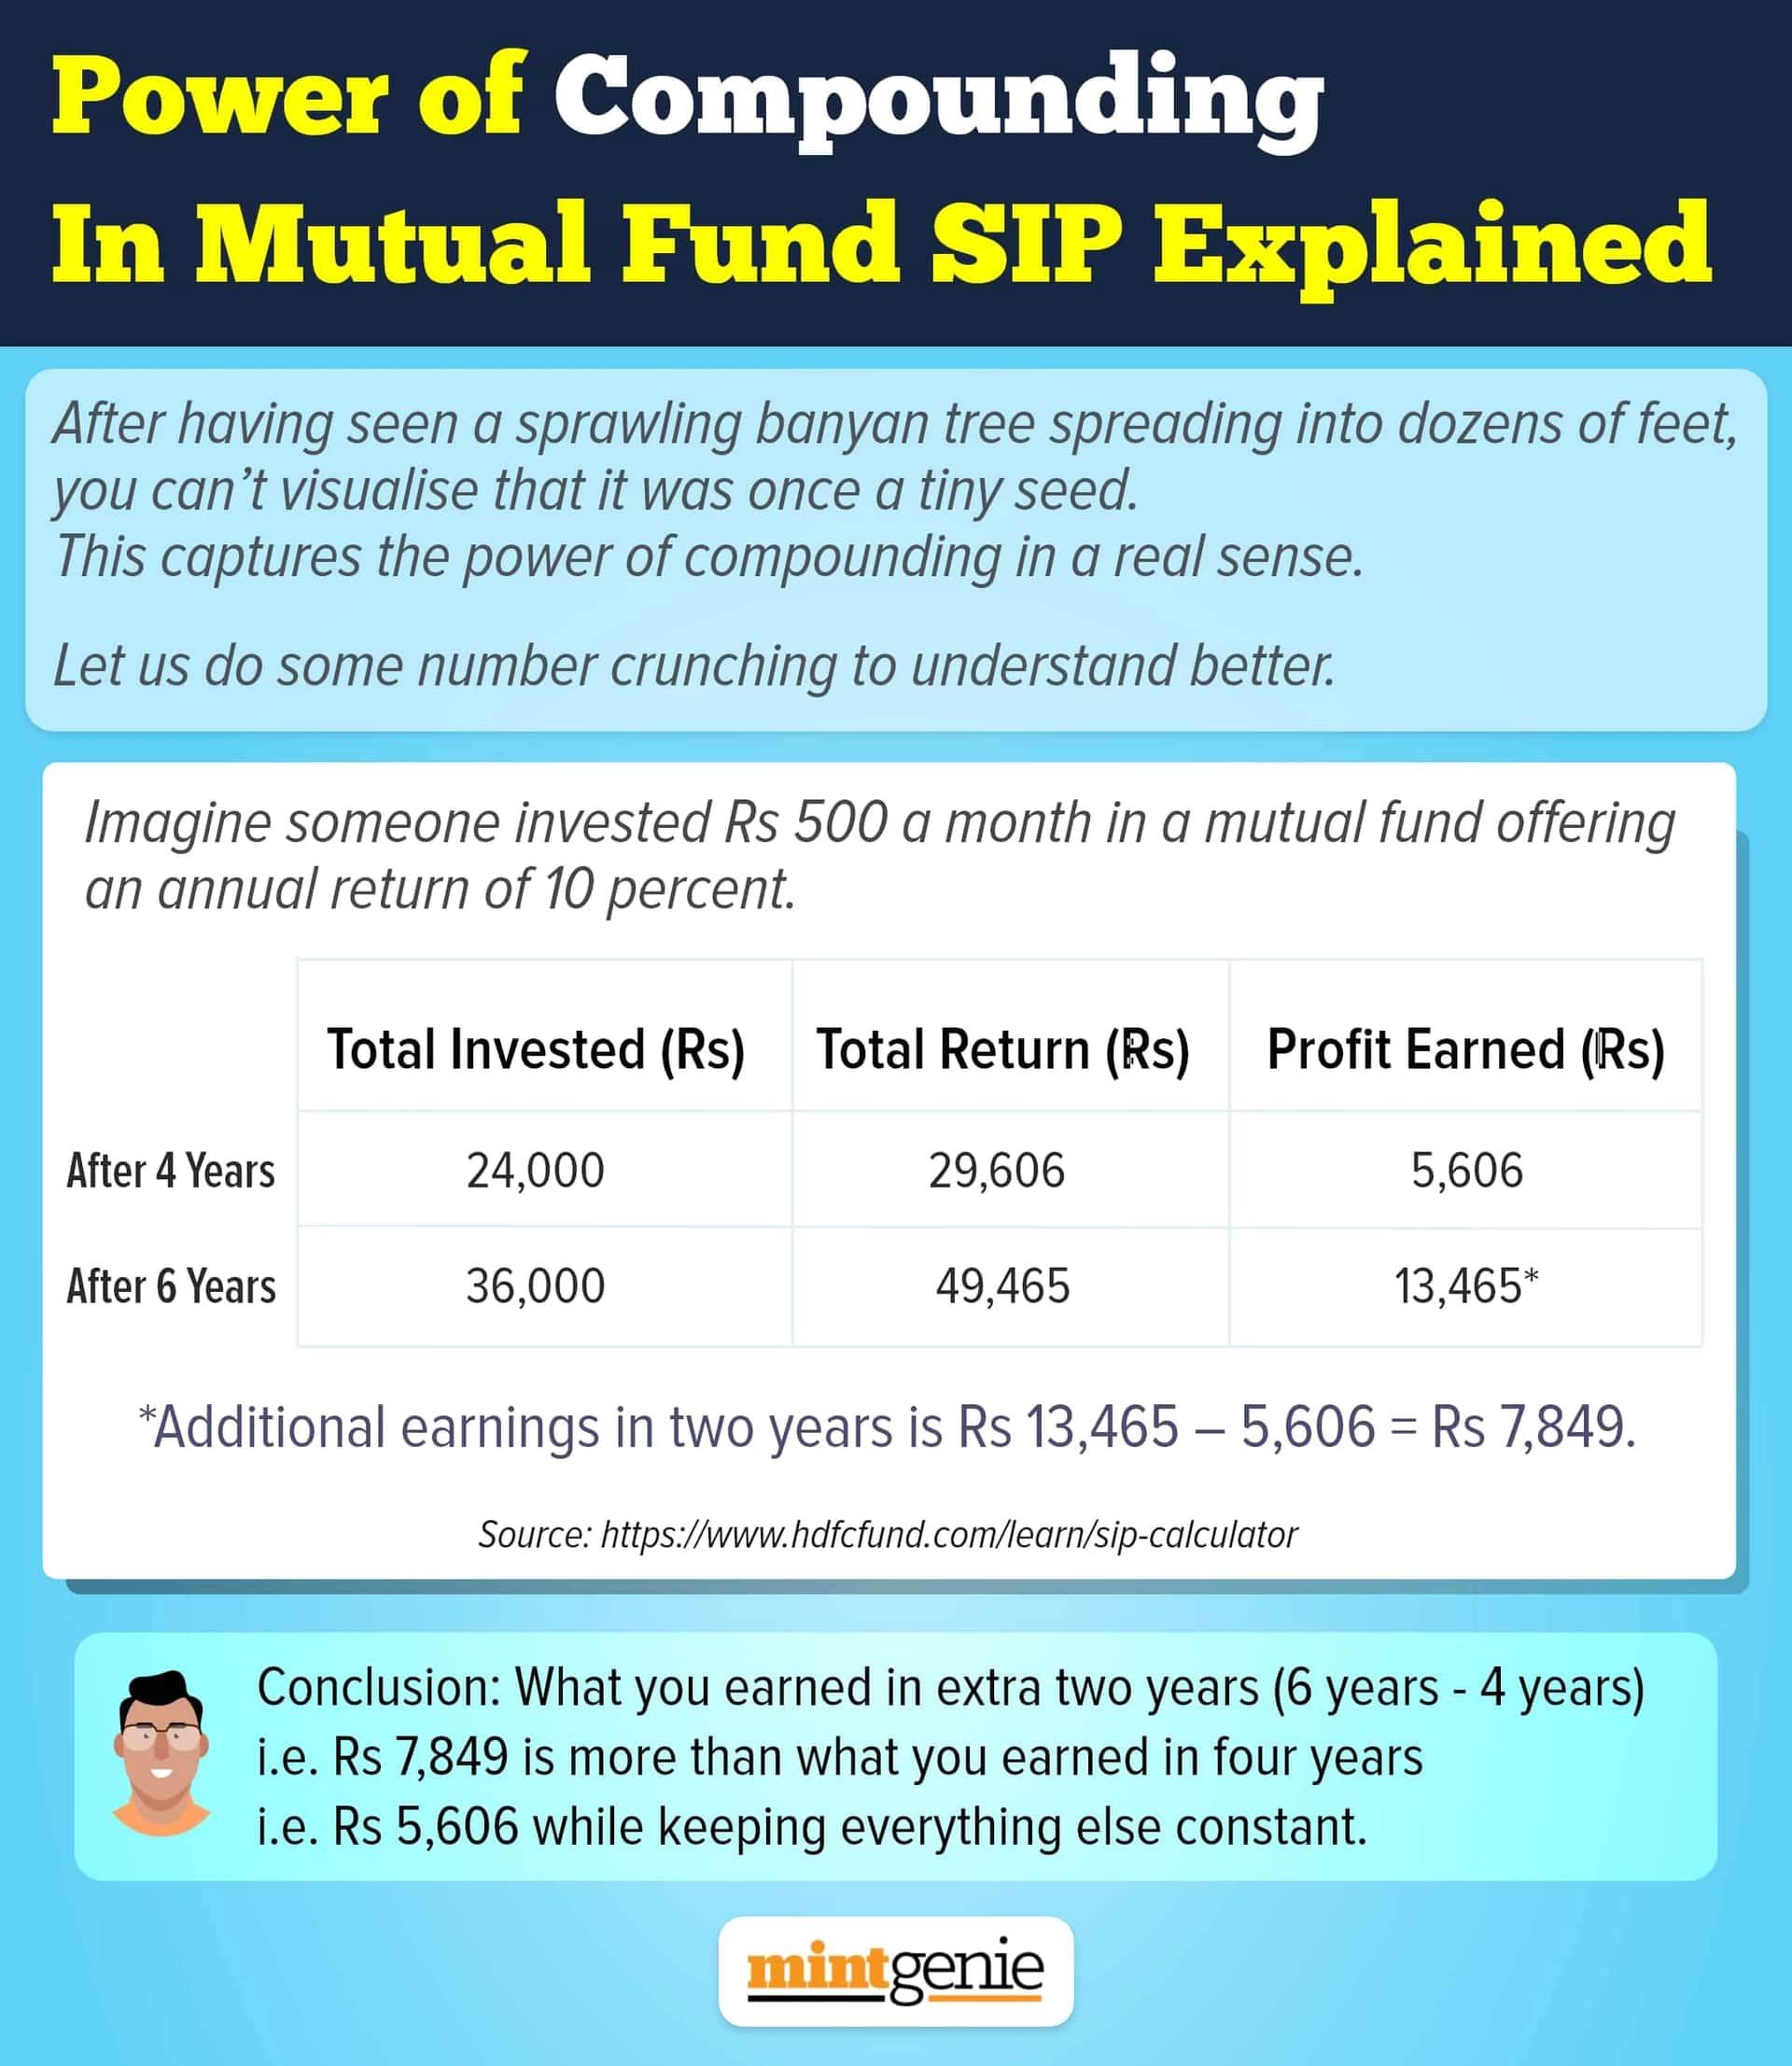 We elaborate on the magic of compounding in mutual fund SIPs.